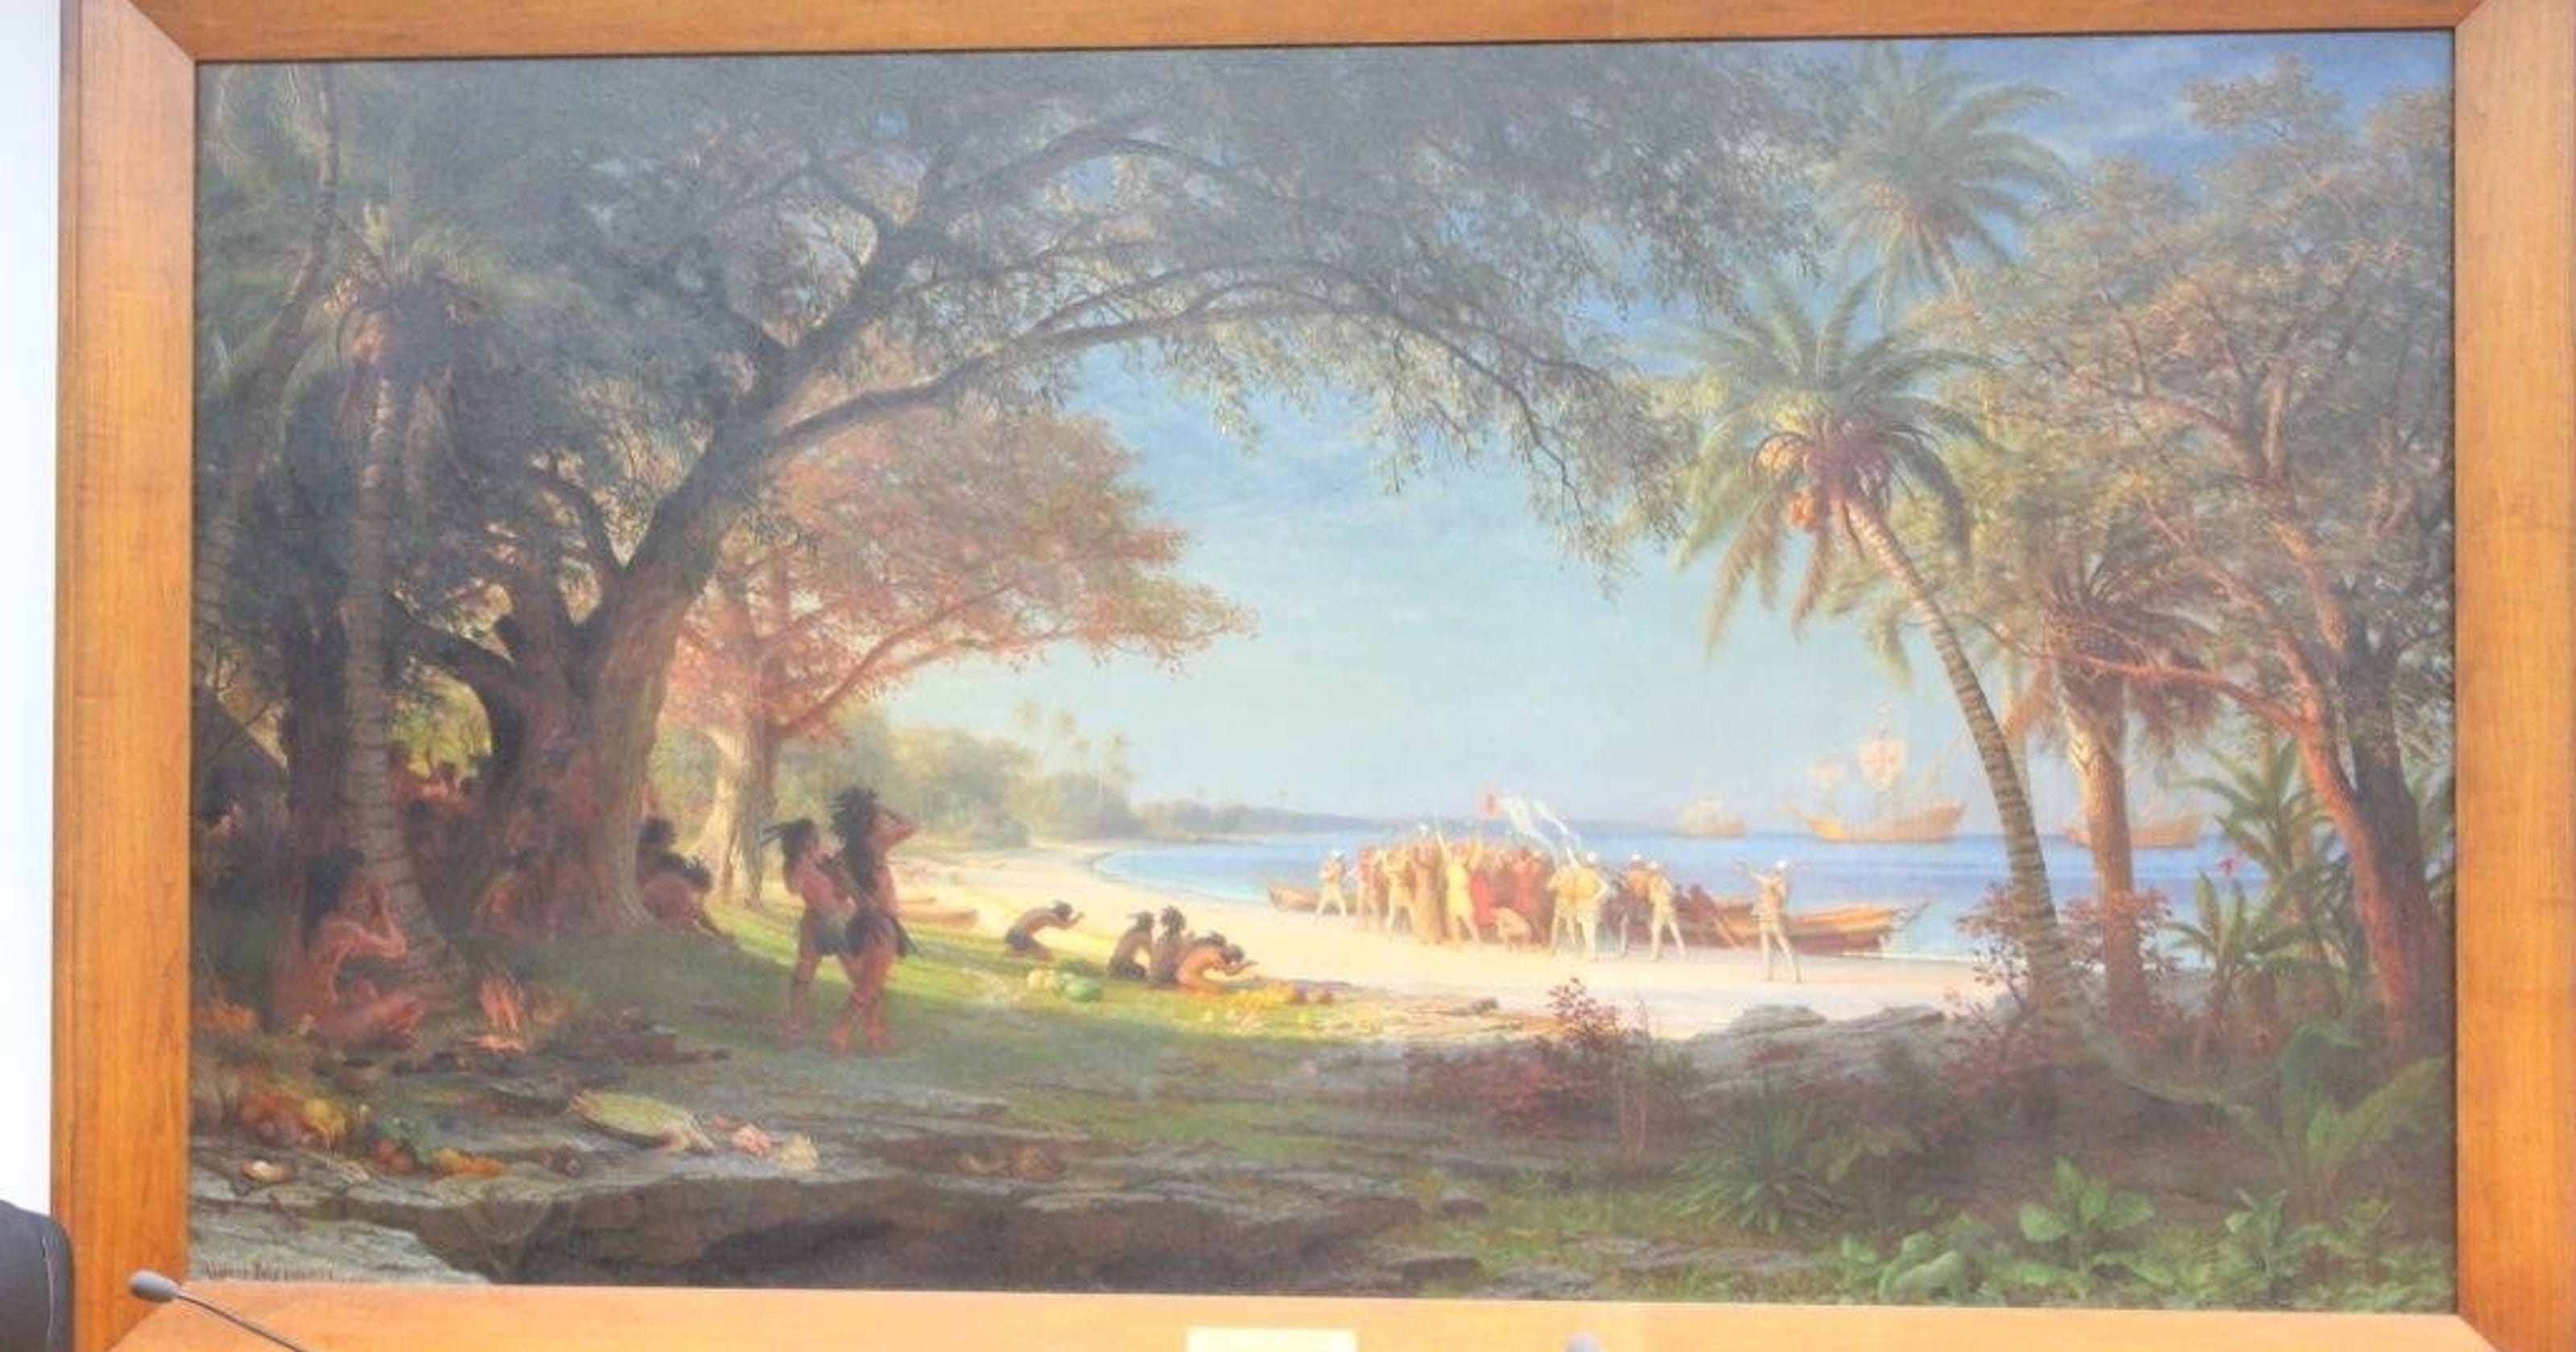 636239702598247319 Columbus Painting ?width=3200&height=1680&fit=crop